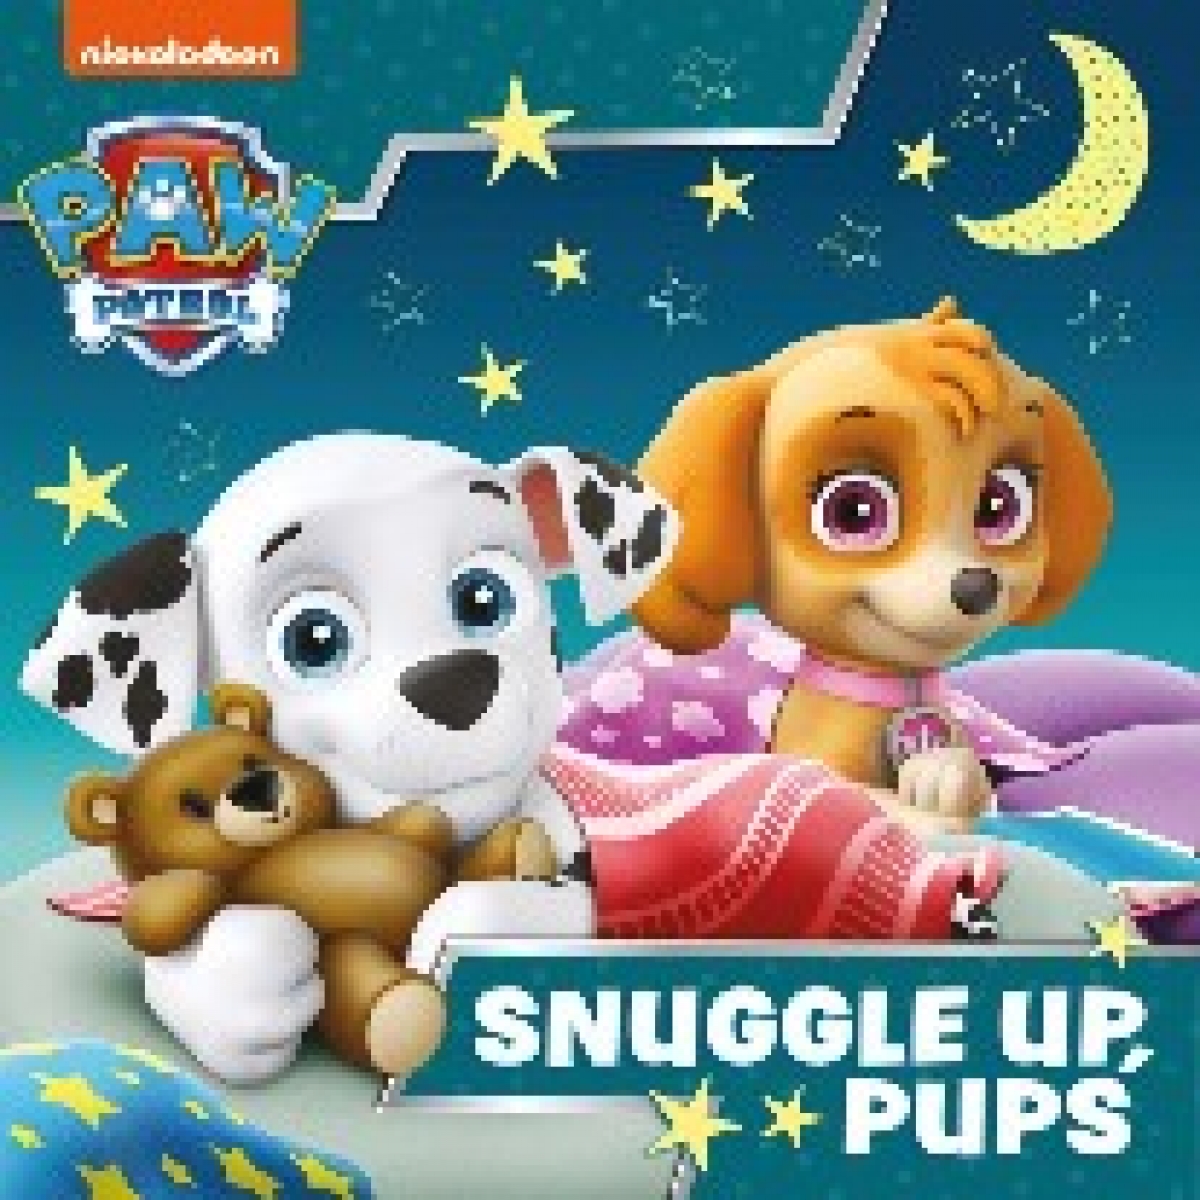 Paw Patrol Paw patrol picture book - snuggle up pups 